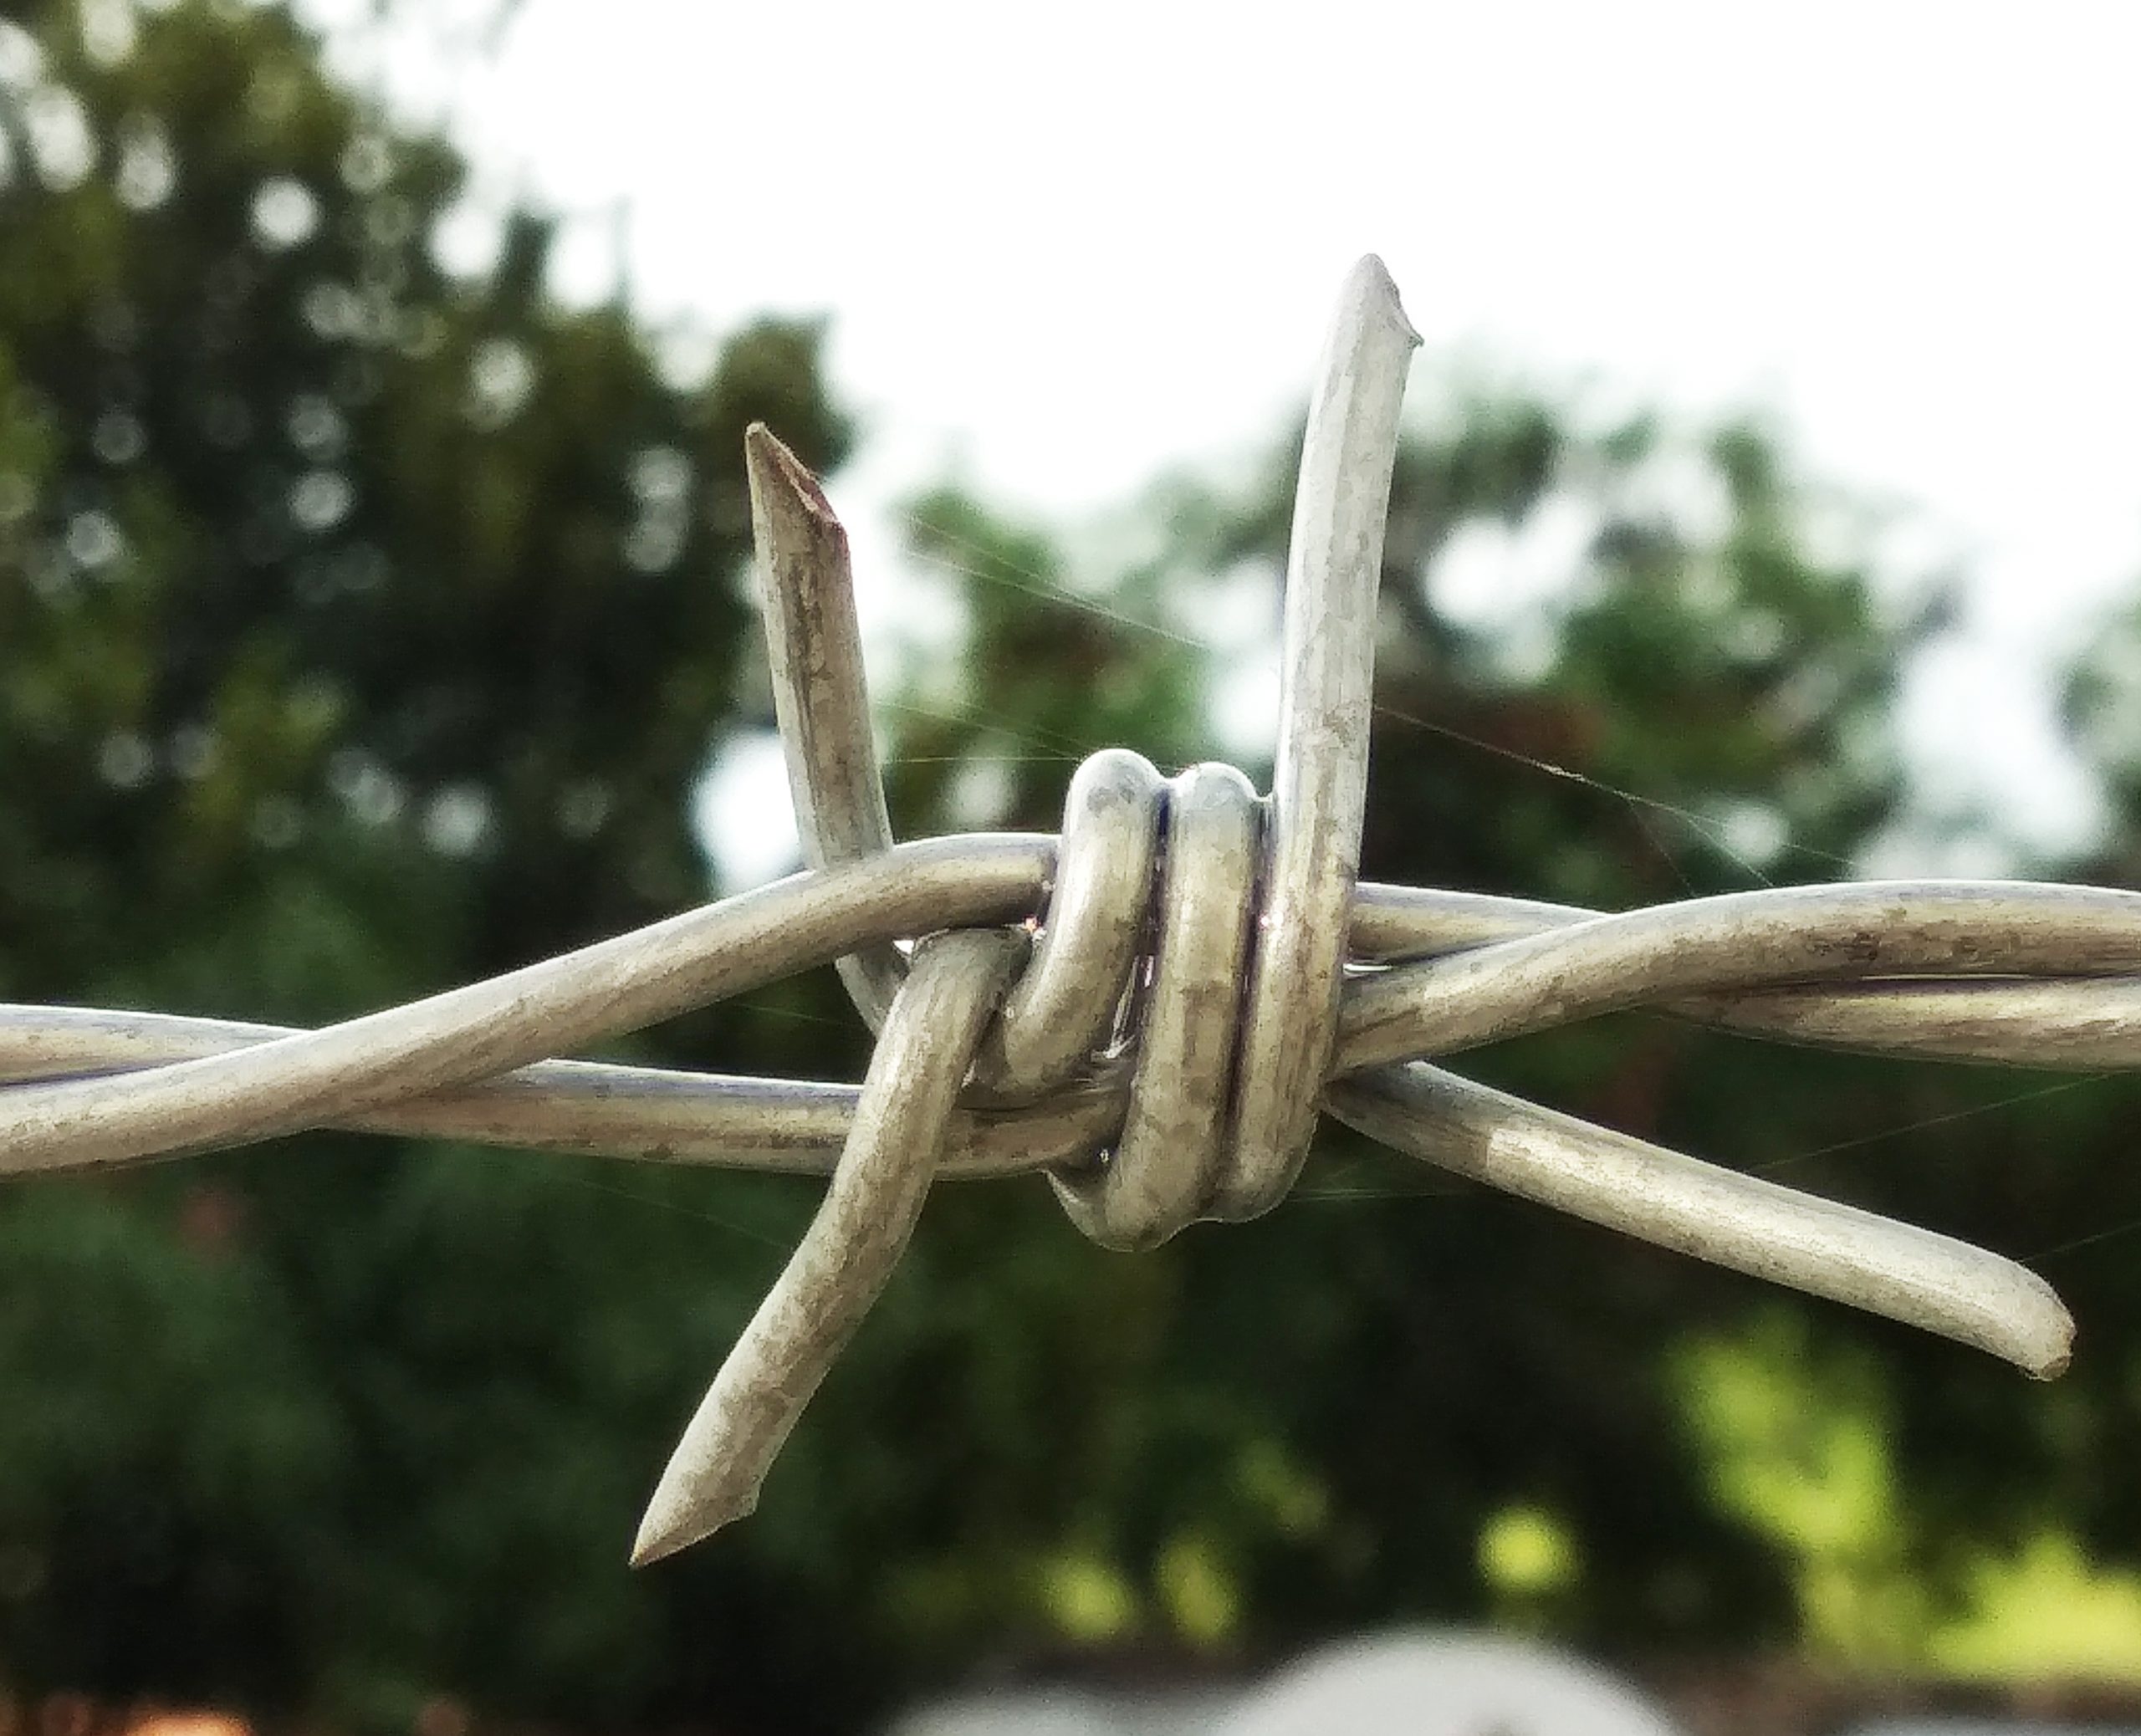 locks of a barbed wire